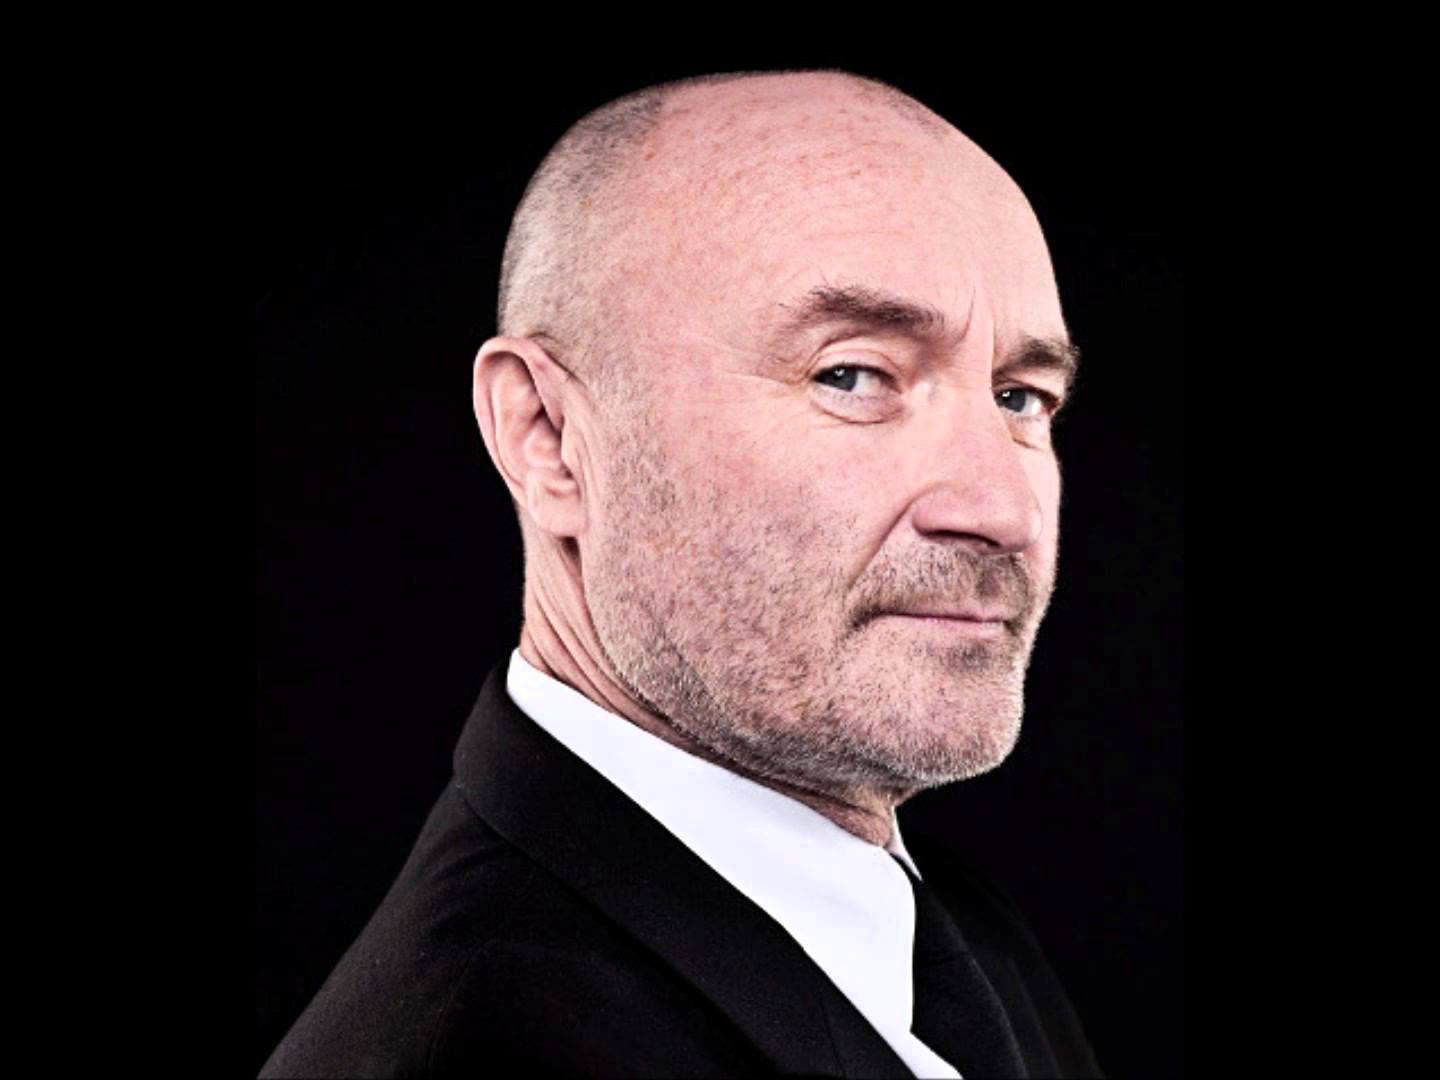 A Half Hour Continuous Loop of the Phil Collins Drum Fill From His